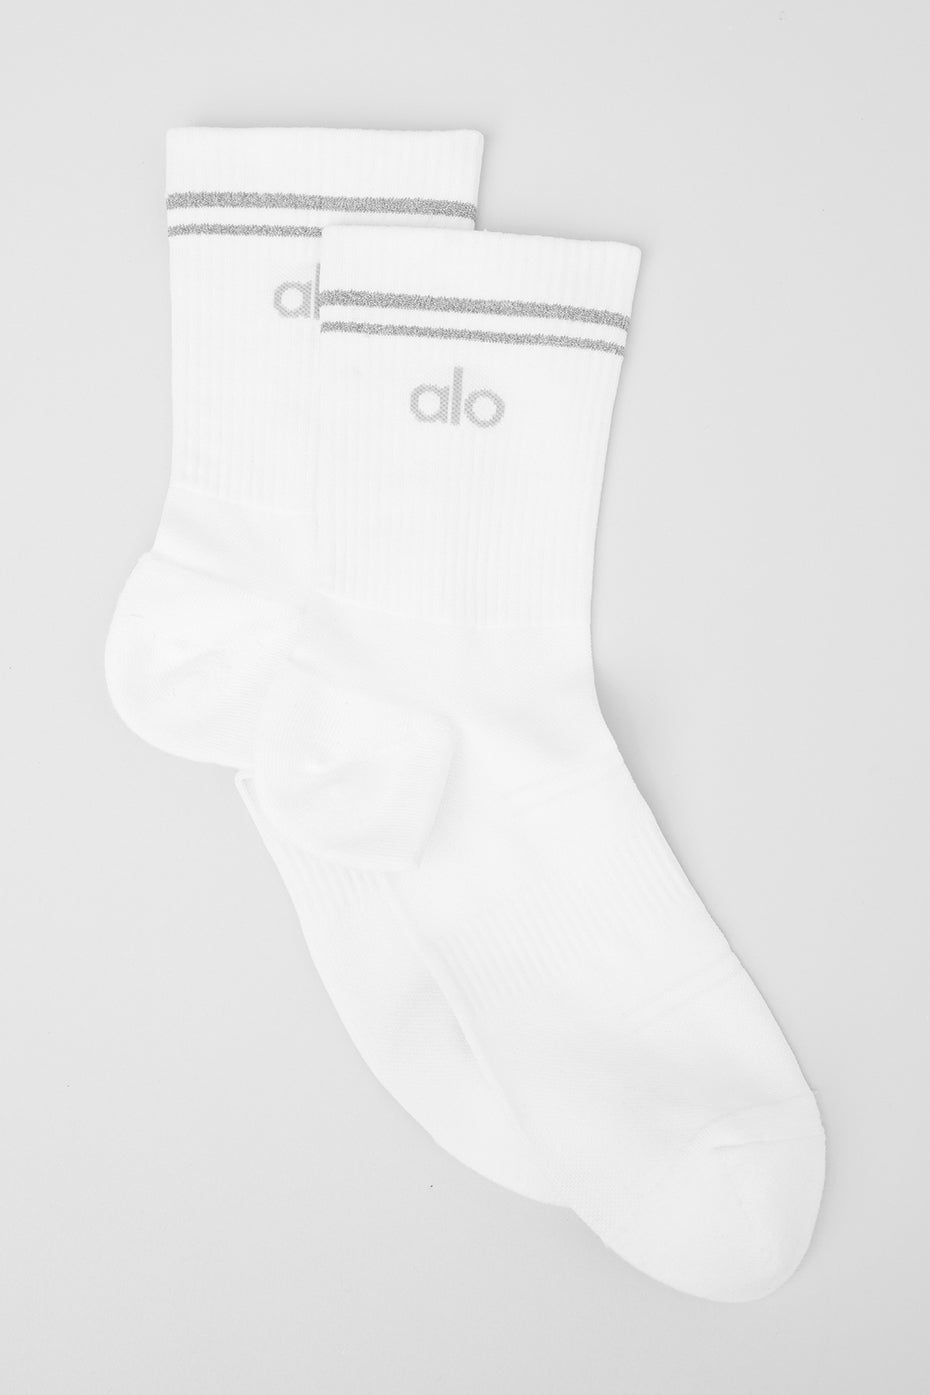 Find Promotion Alo Yoga Unisex Throwback Sock Gravel/White with a